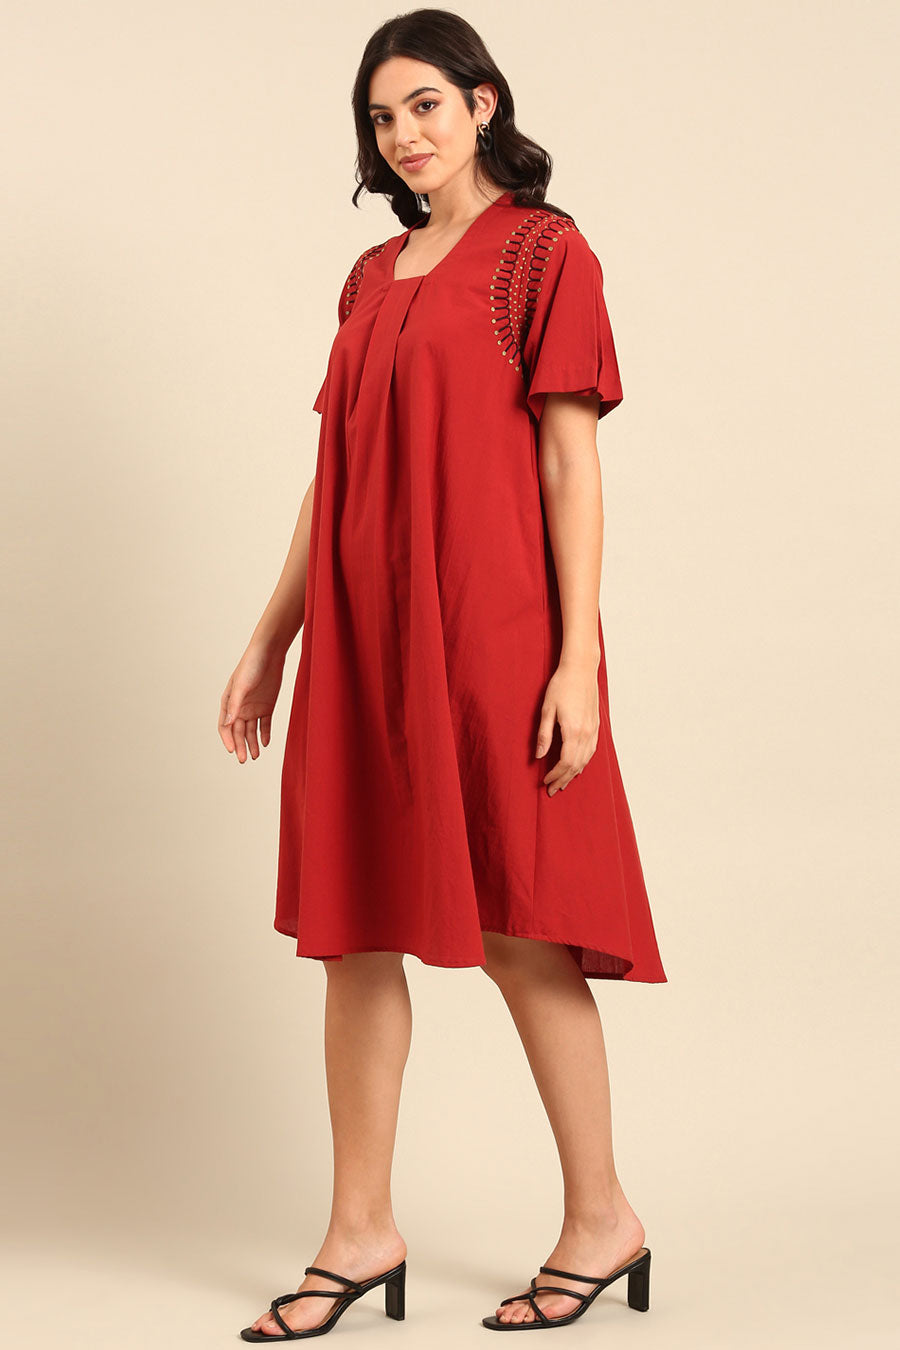 Red Embroidered A-Line Dress